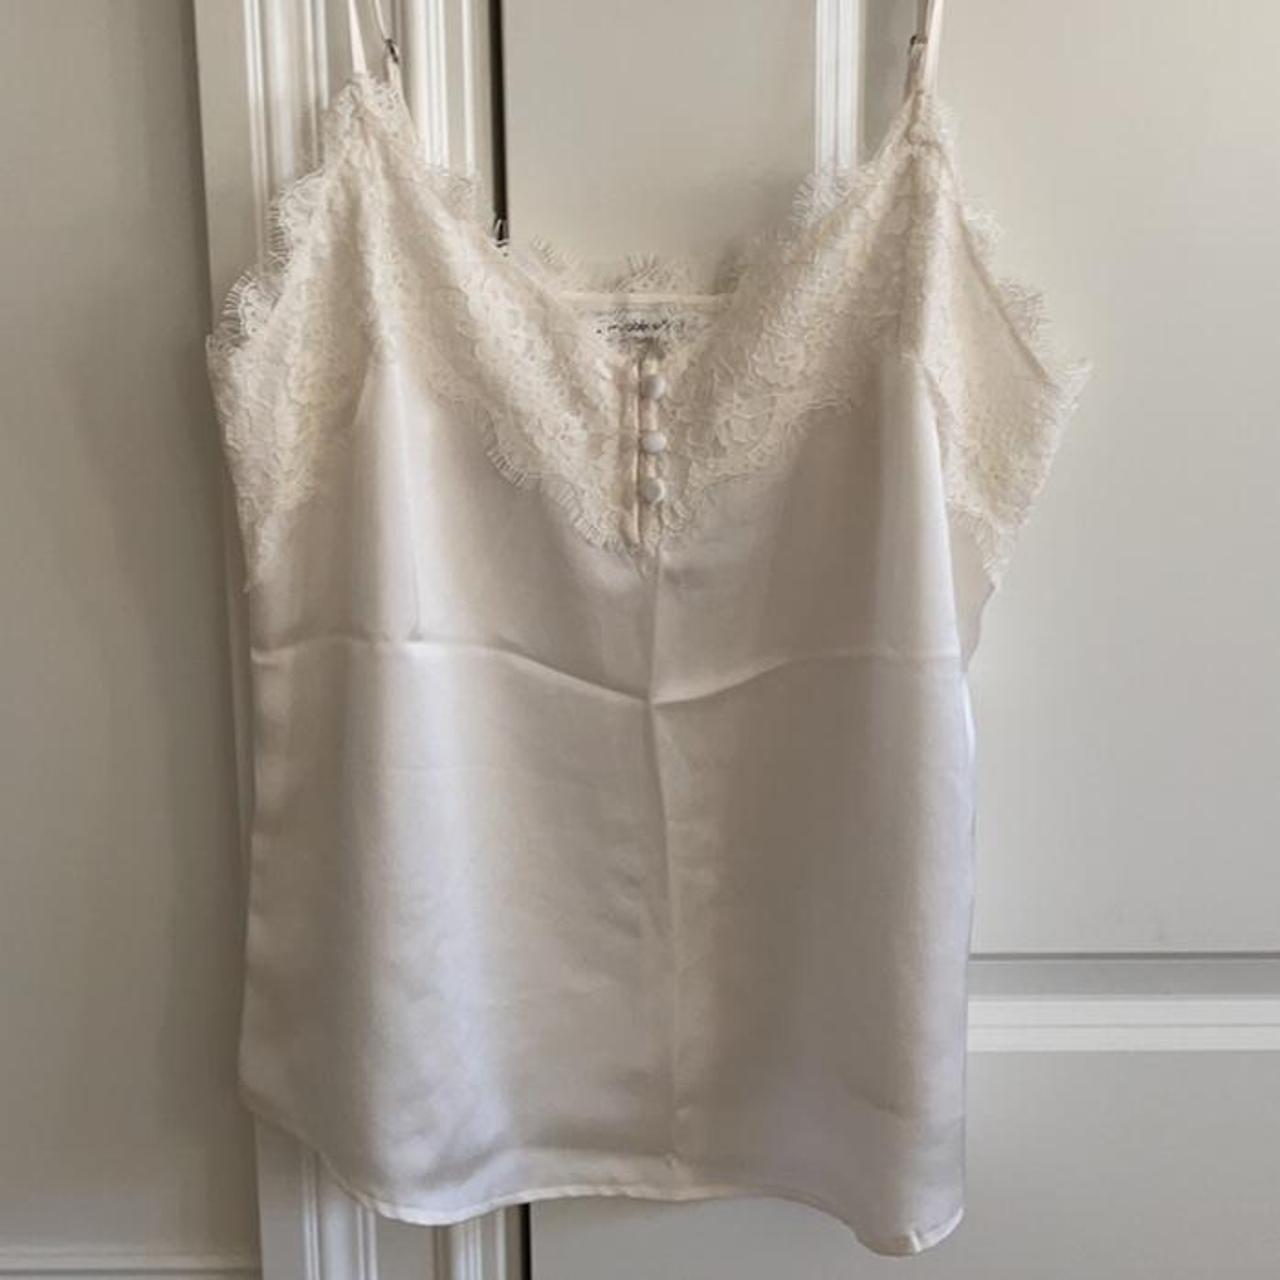 Abercrombie & Fitch Women's White and Cream Vests-tanks-camis | Depop